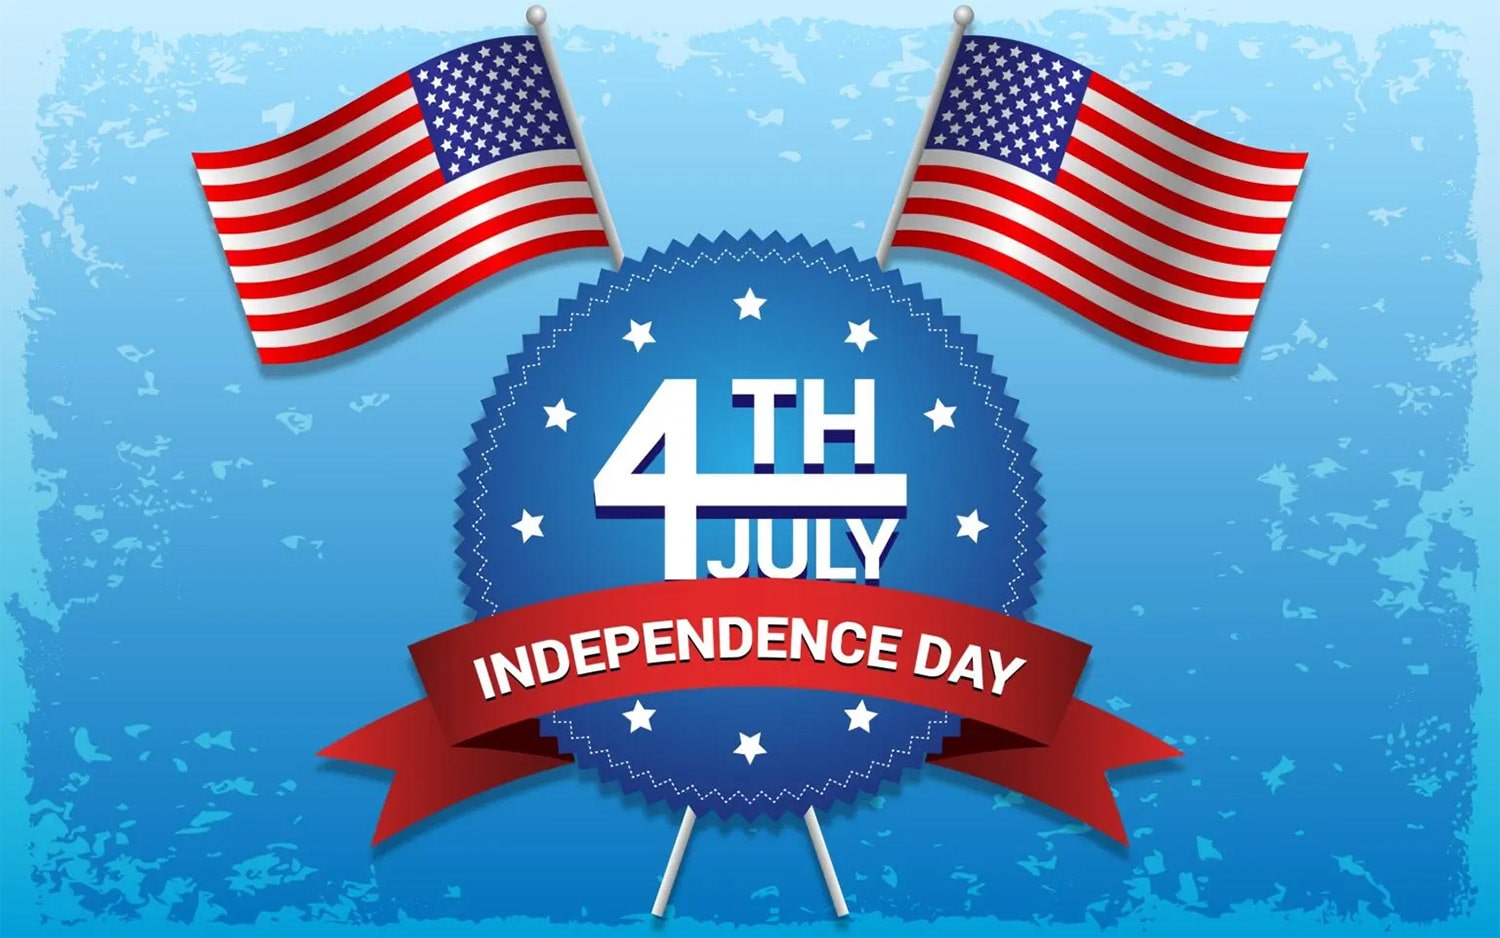 32 interesting facts about Independence Day